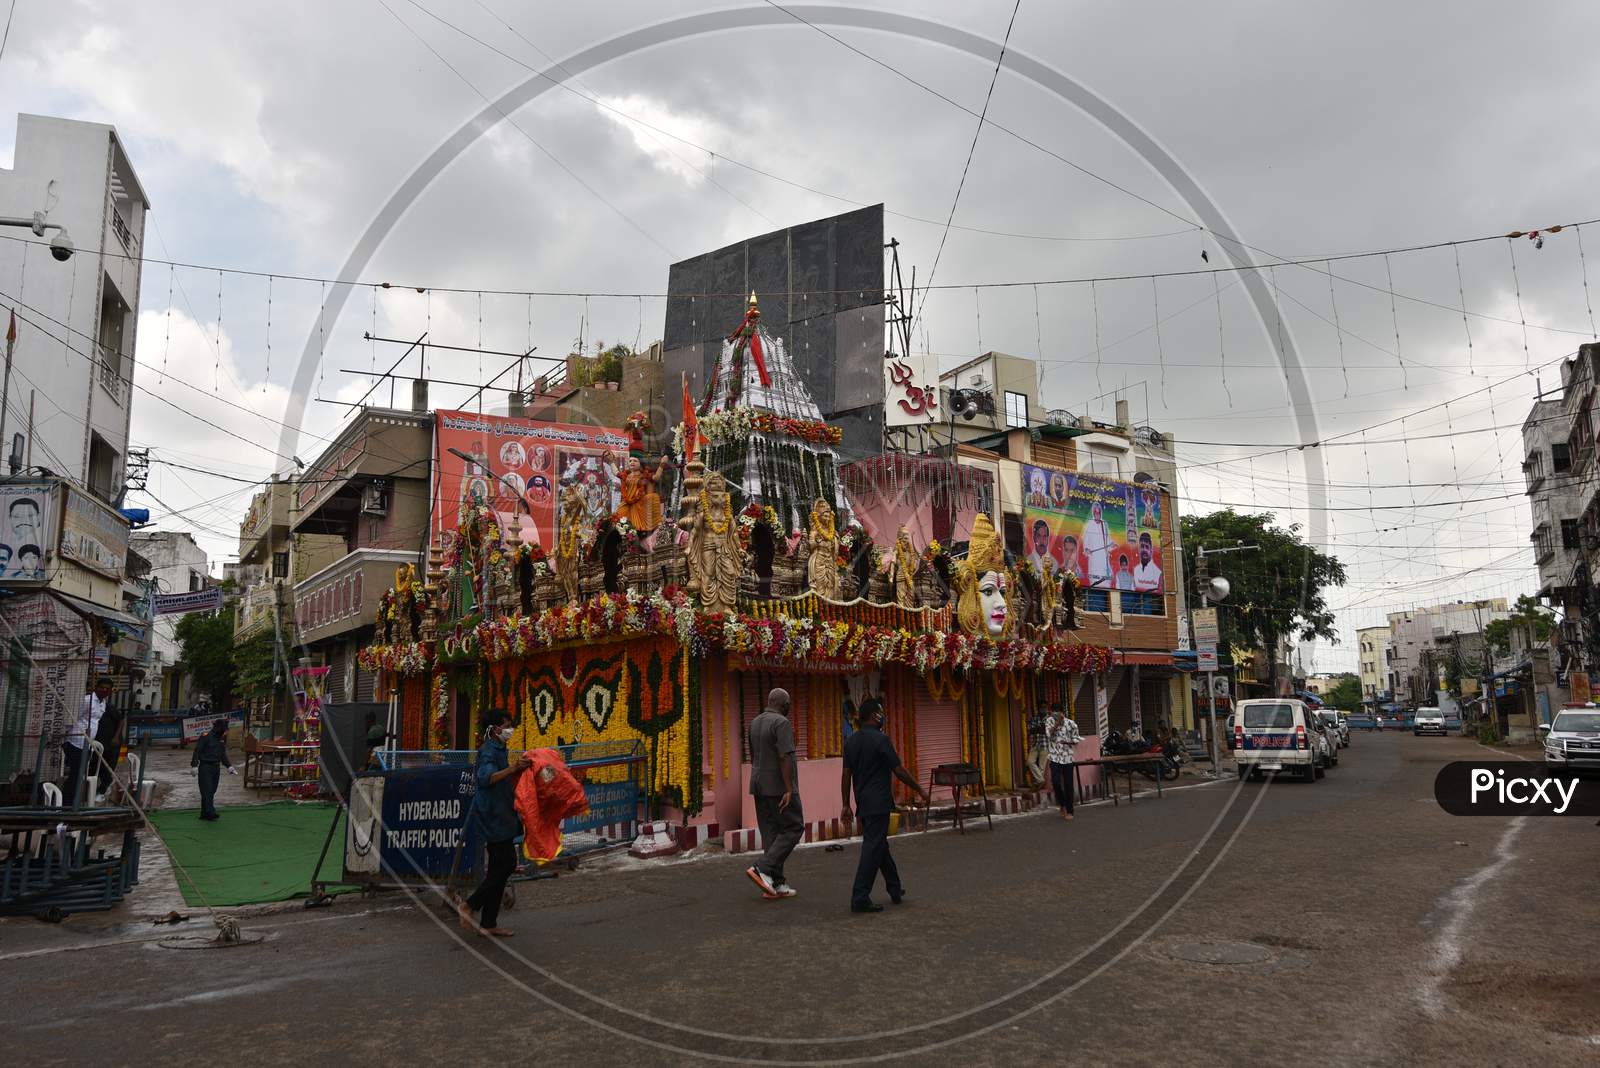 A deserted view of Lal Darwaza Mahankali temple on the last day of Bonalu Festival 2020 amid rising fears of Coronavirus,July 19, 2020, Hyderabad